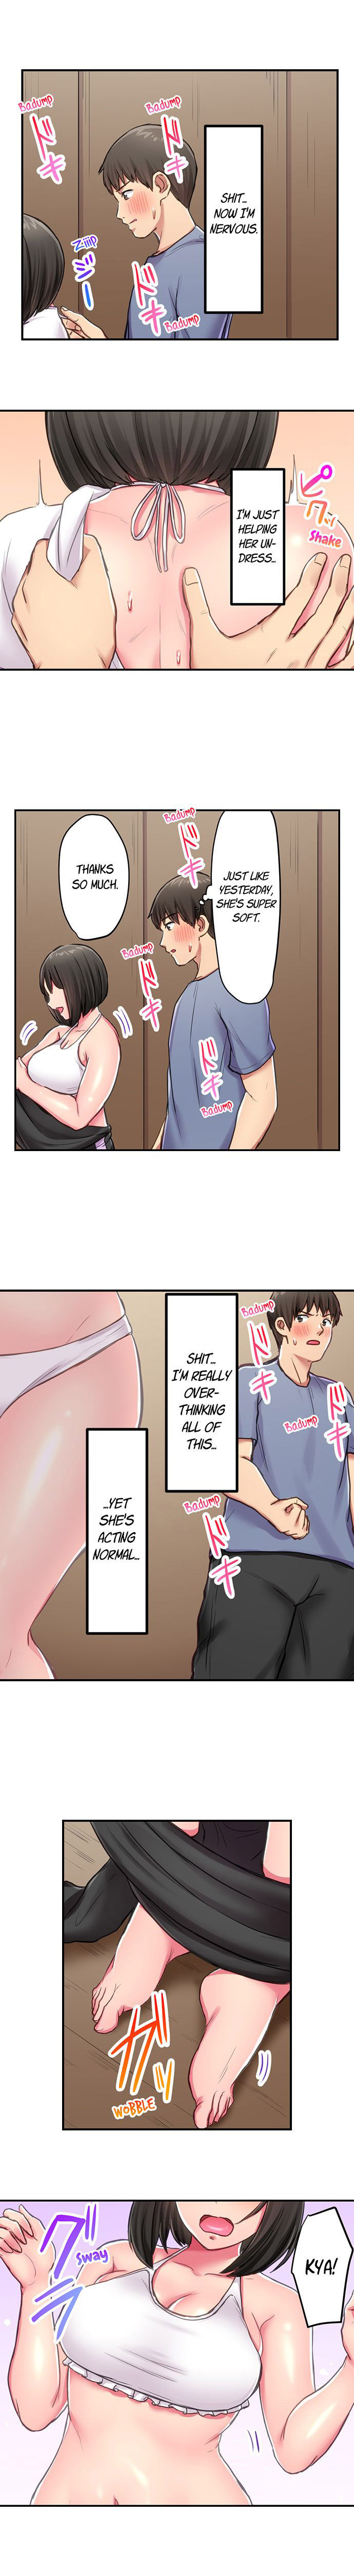 Blooming Summer Making Her Cum in Her Tight Wetsuit - Chapter 5 Page 6